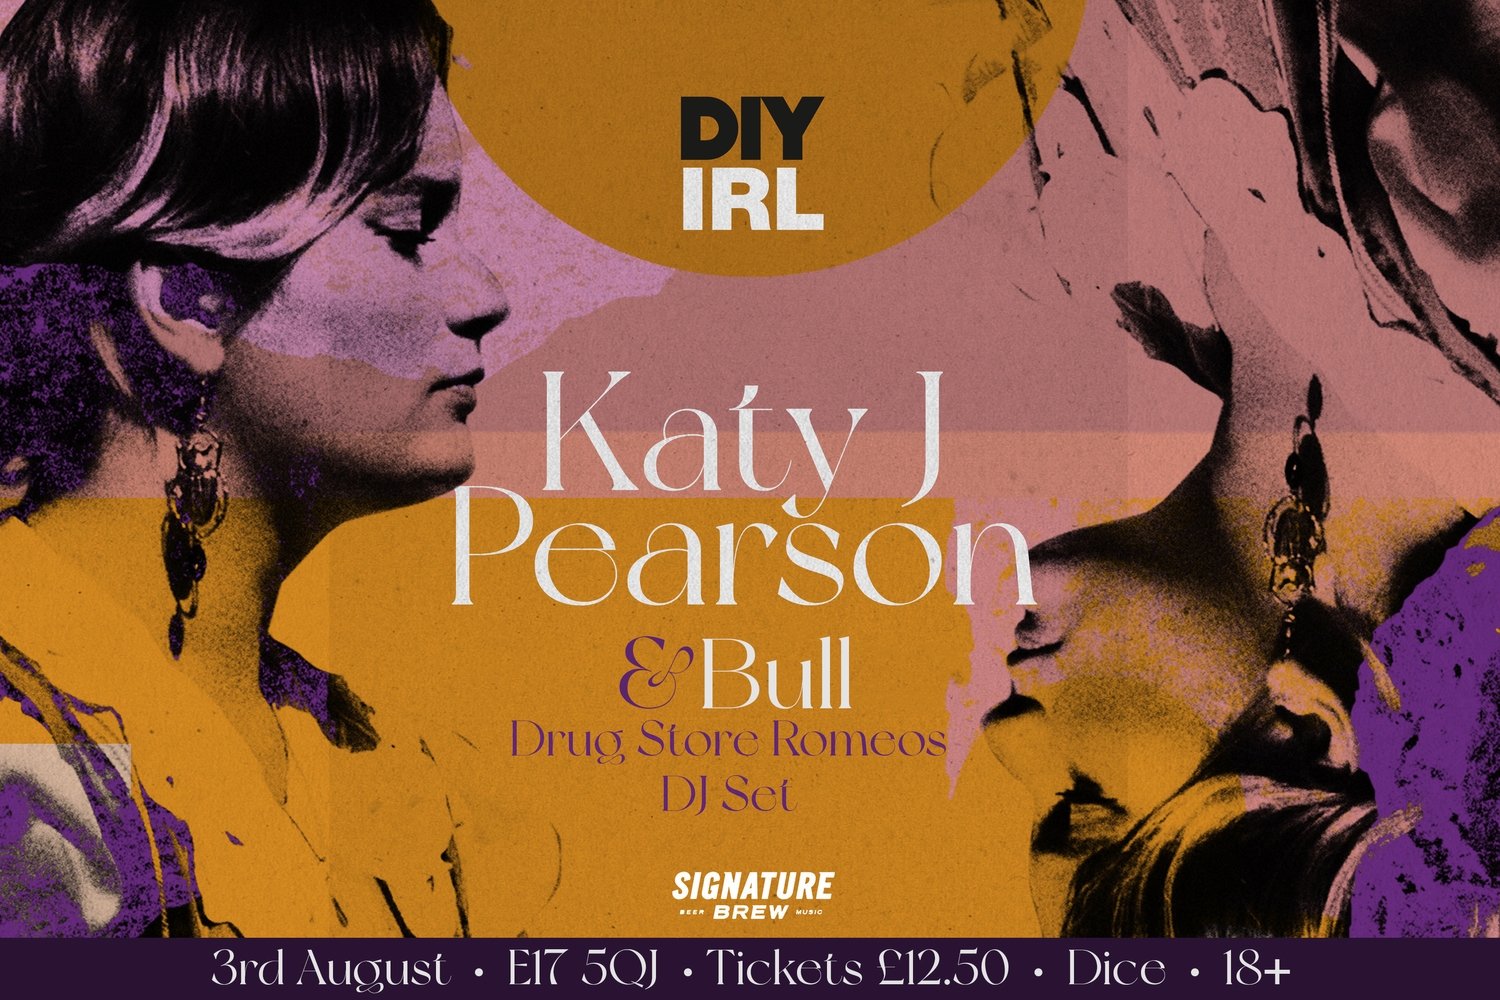 Katy J Pearson and Bull to play the first DIY IRL show next month